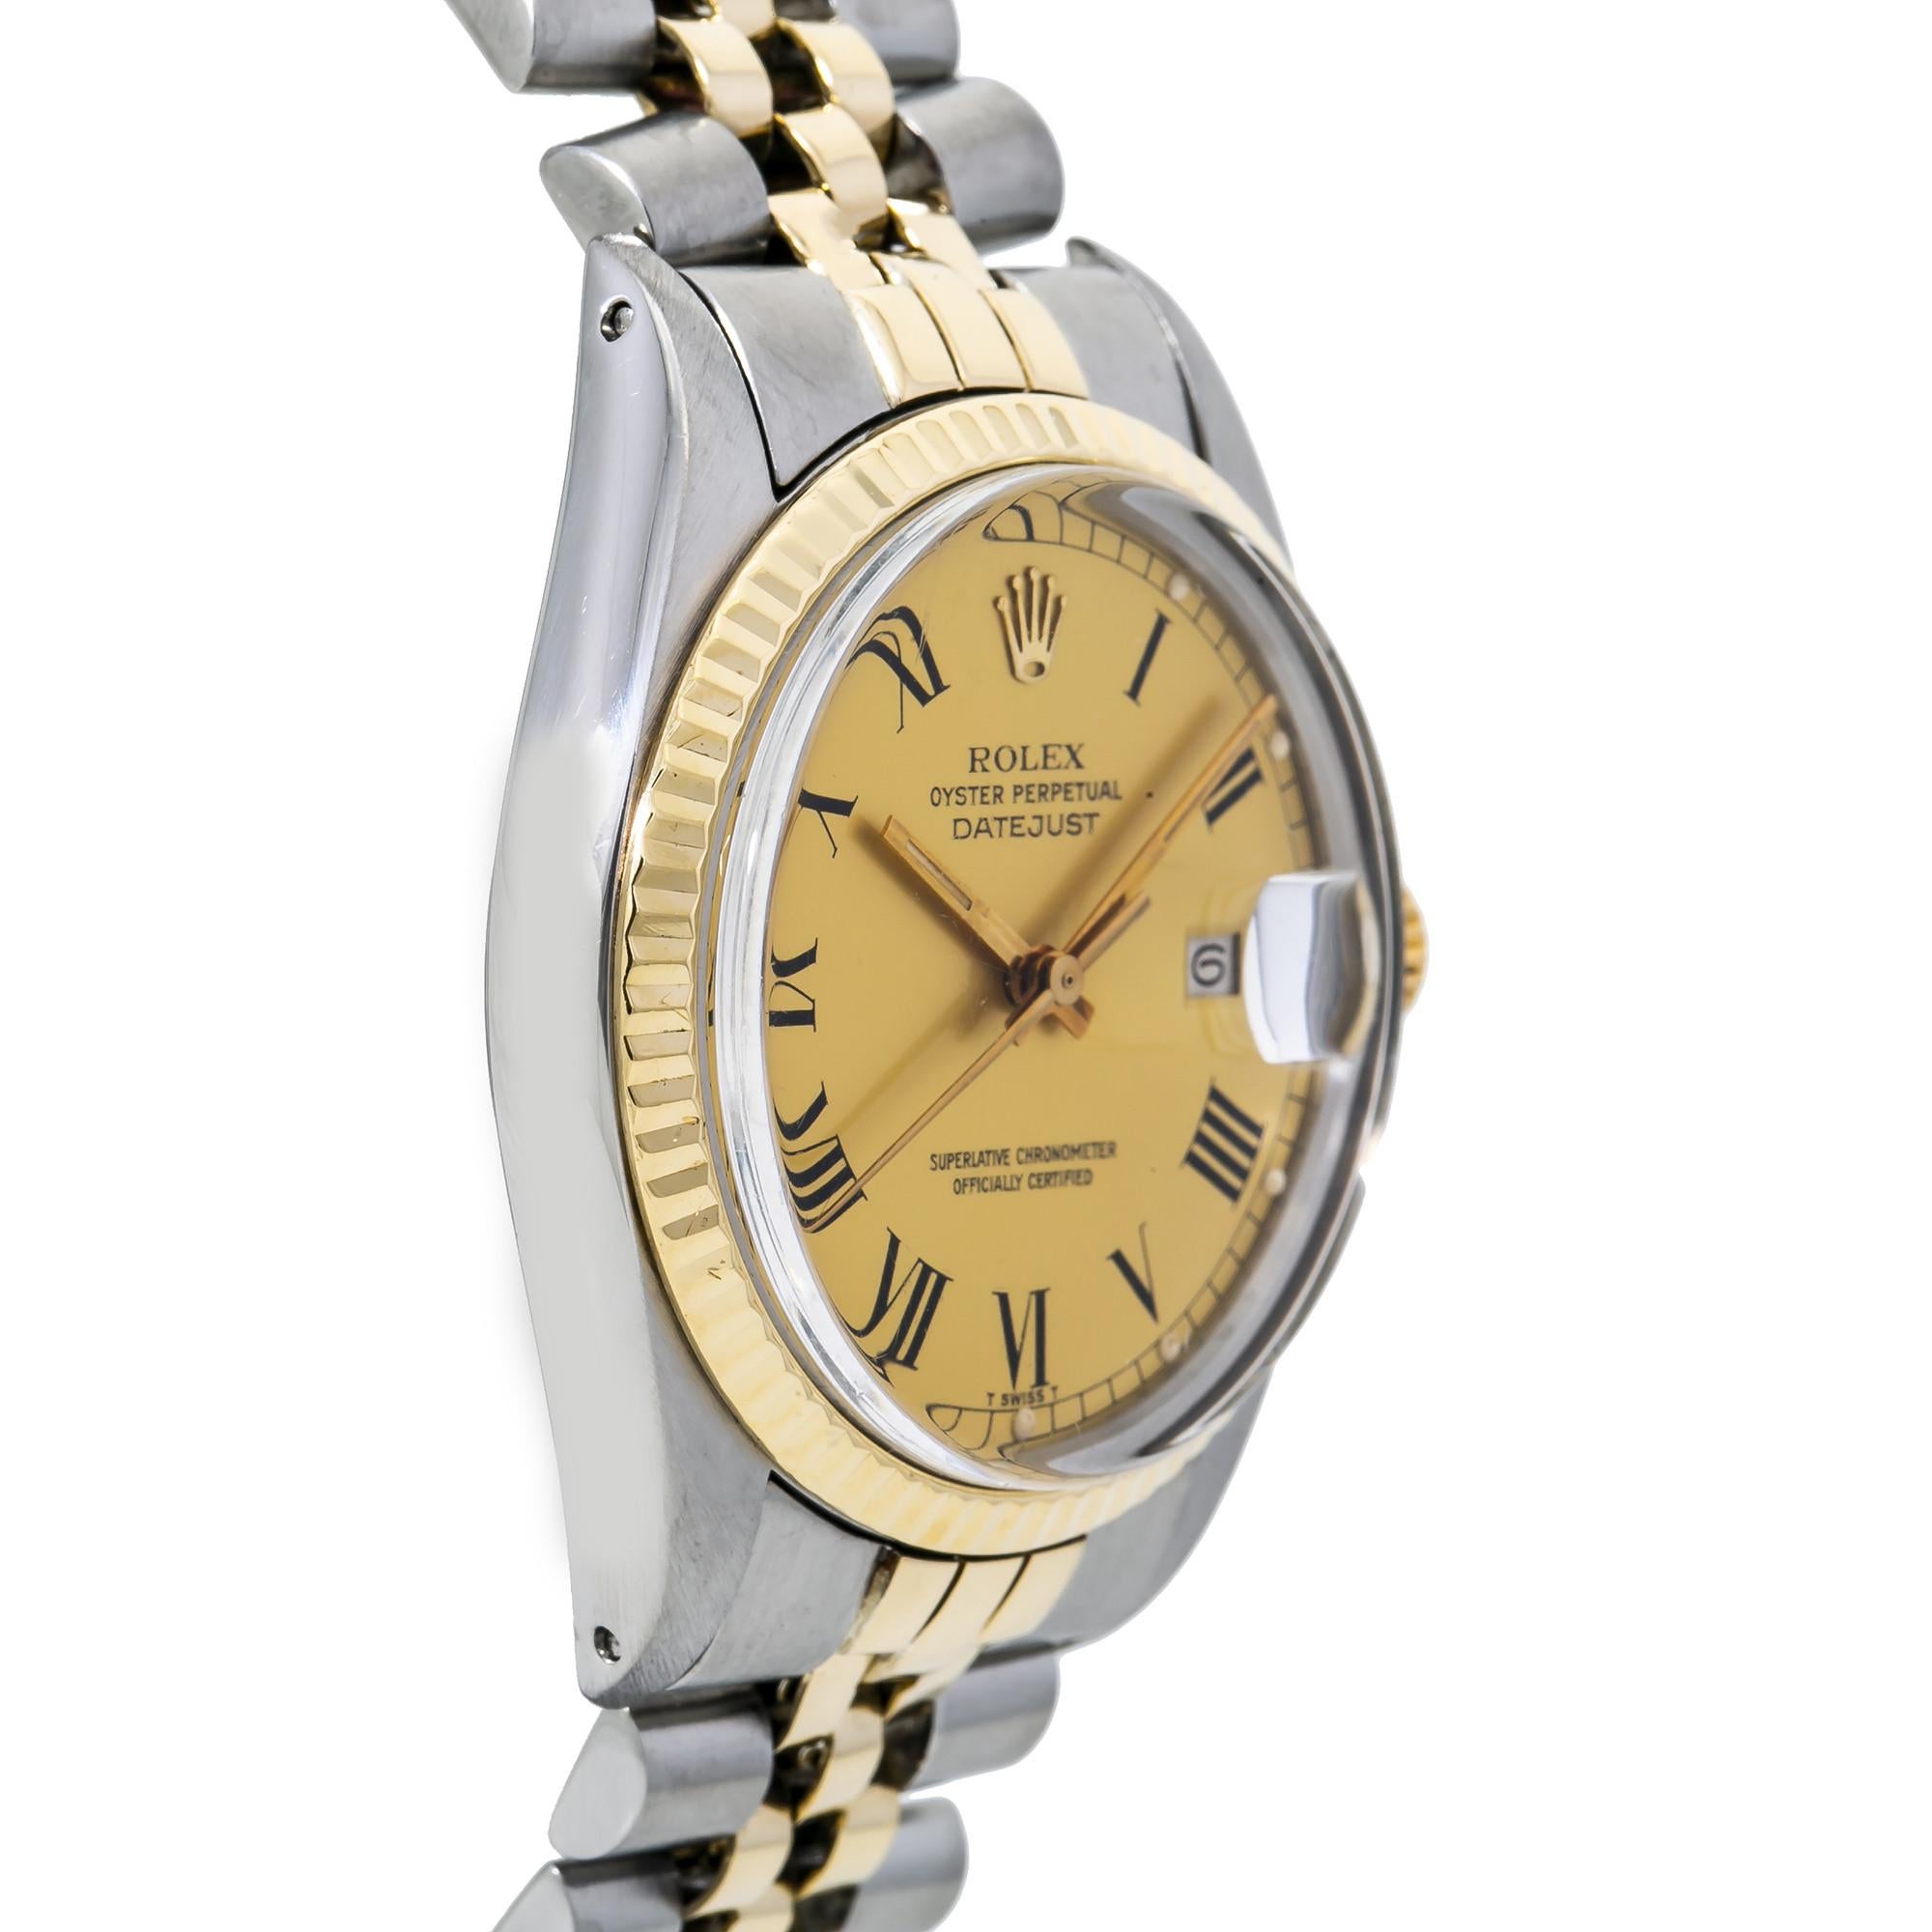 Rolex Datejust 16013, Champagne Dial, Certified and Warranty For Sale 1